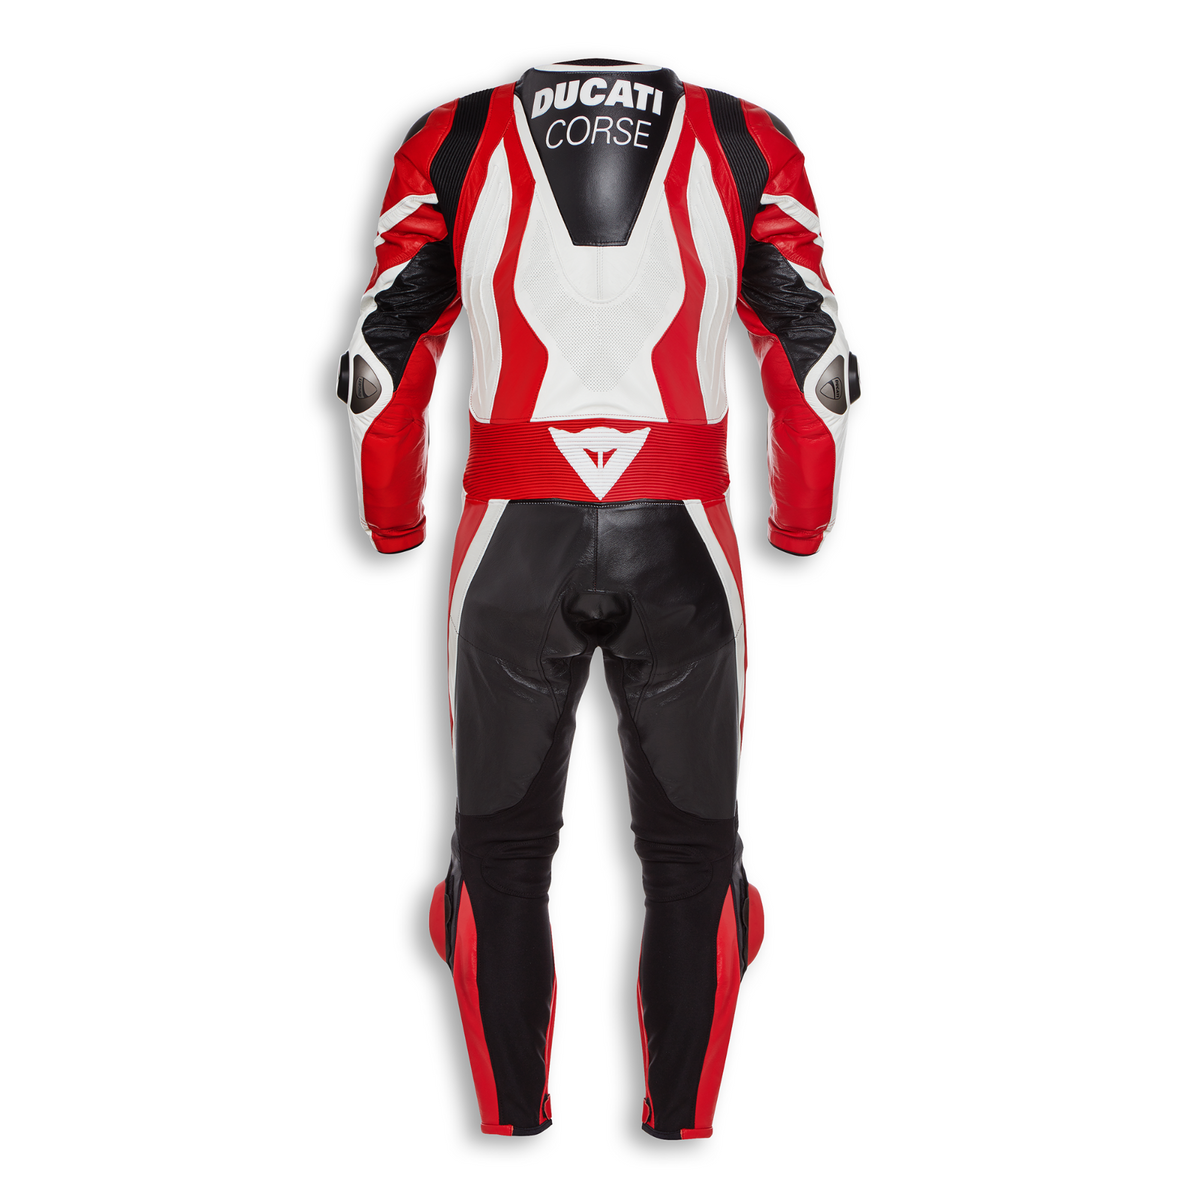 Ducati Corse White Red Motorbike Custom Design Cowhide Leather Suit Motorcycle Racing Suit Back